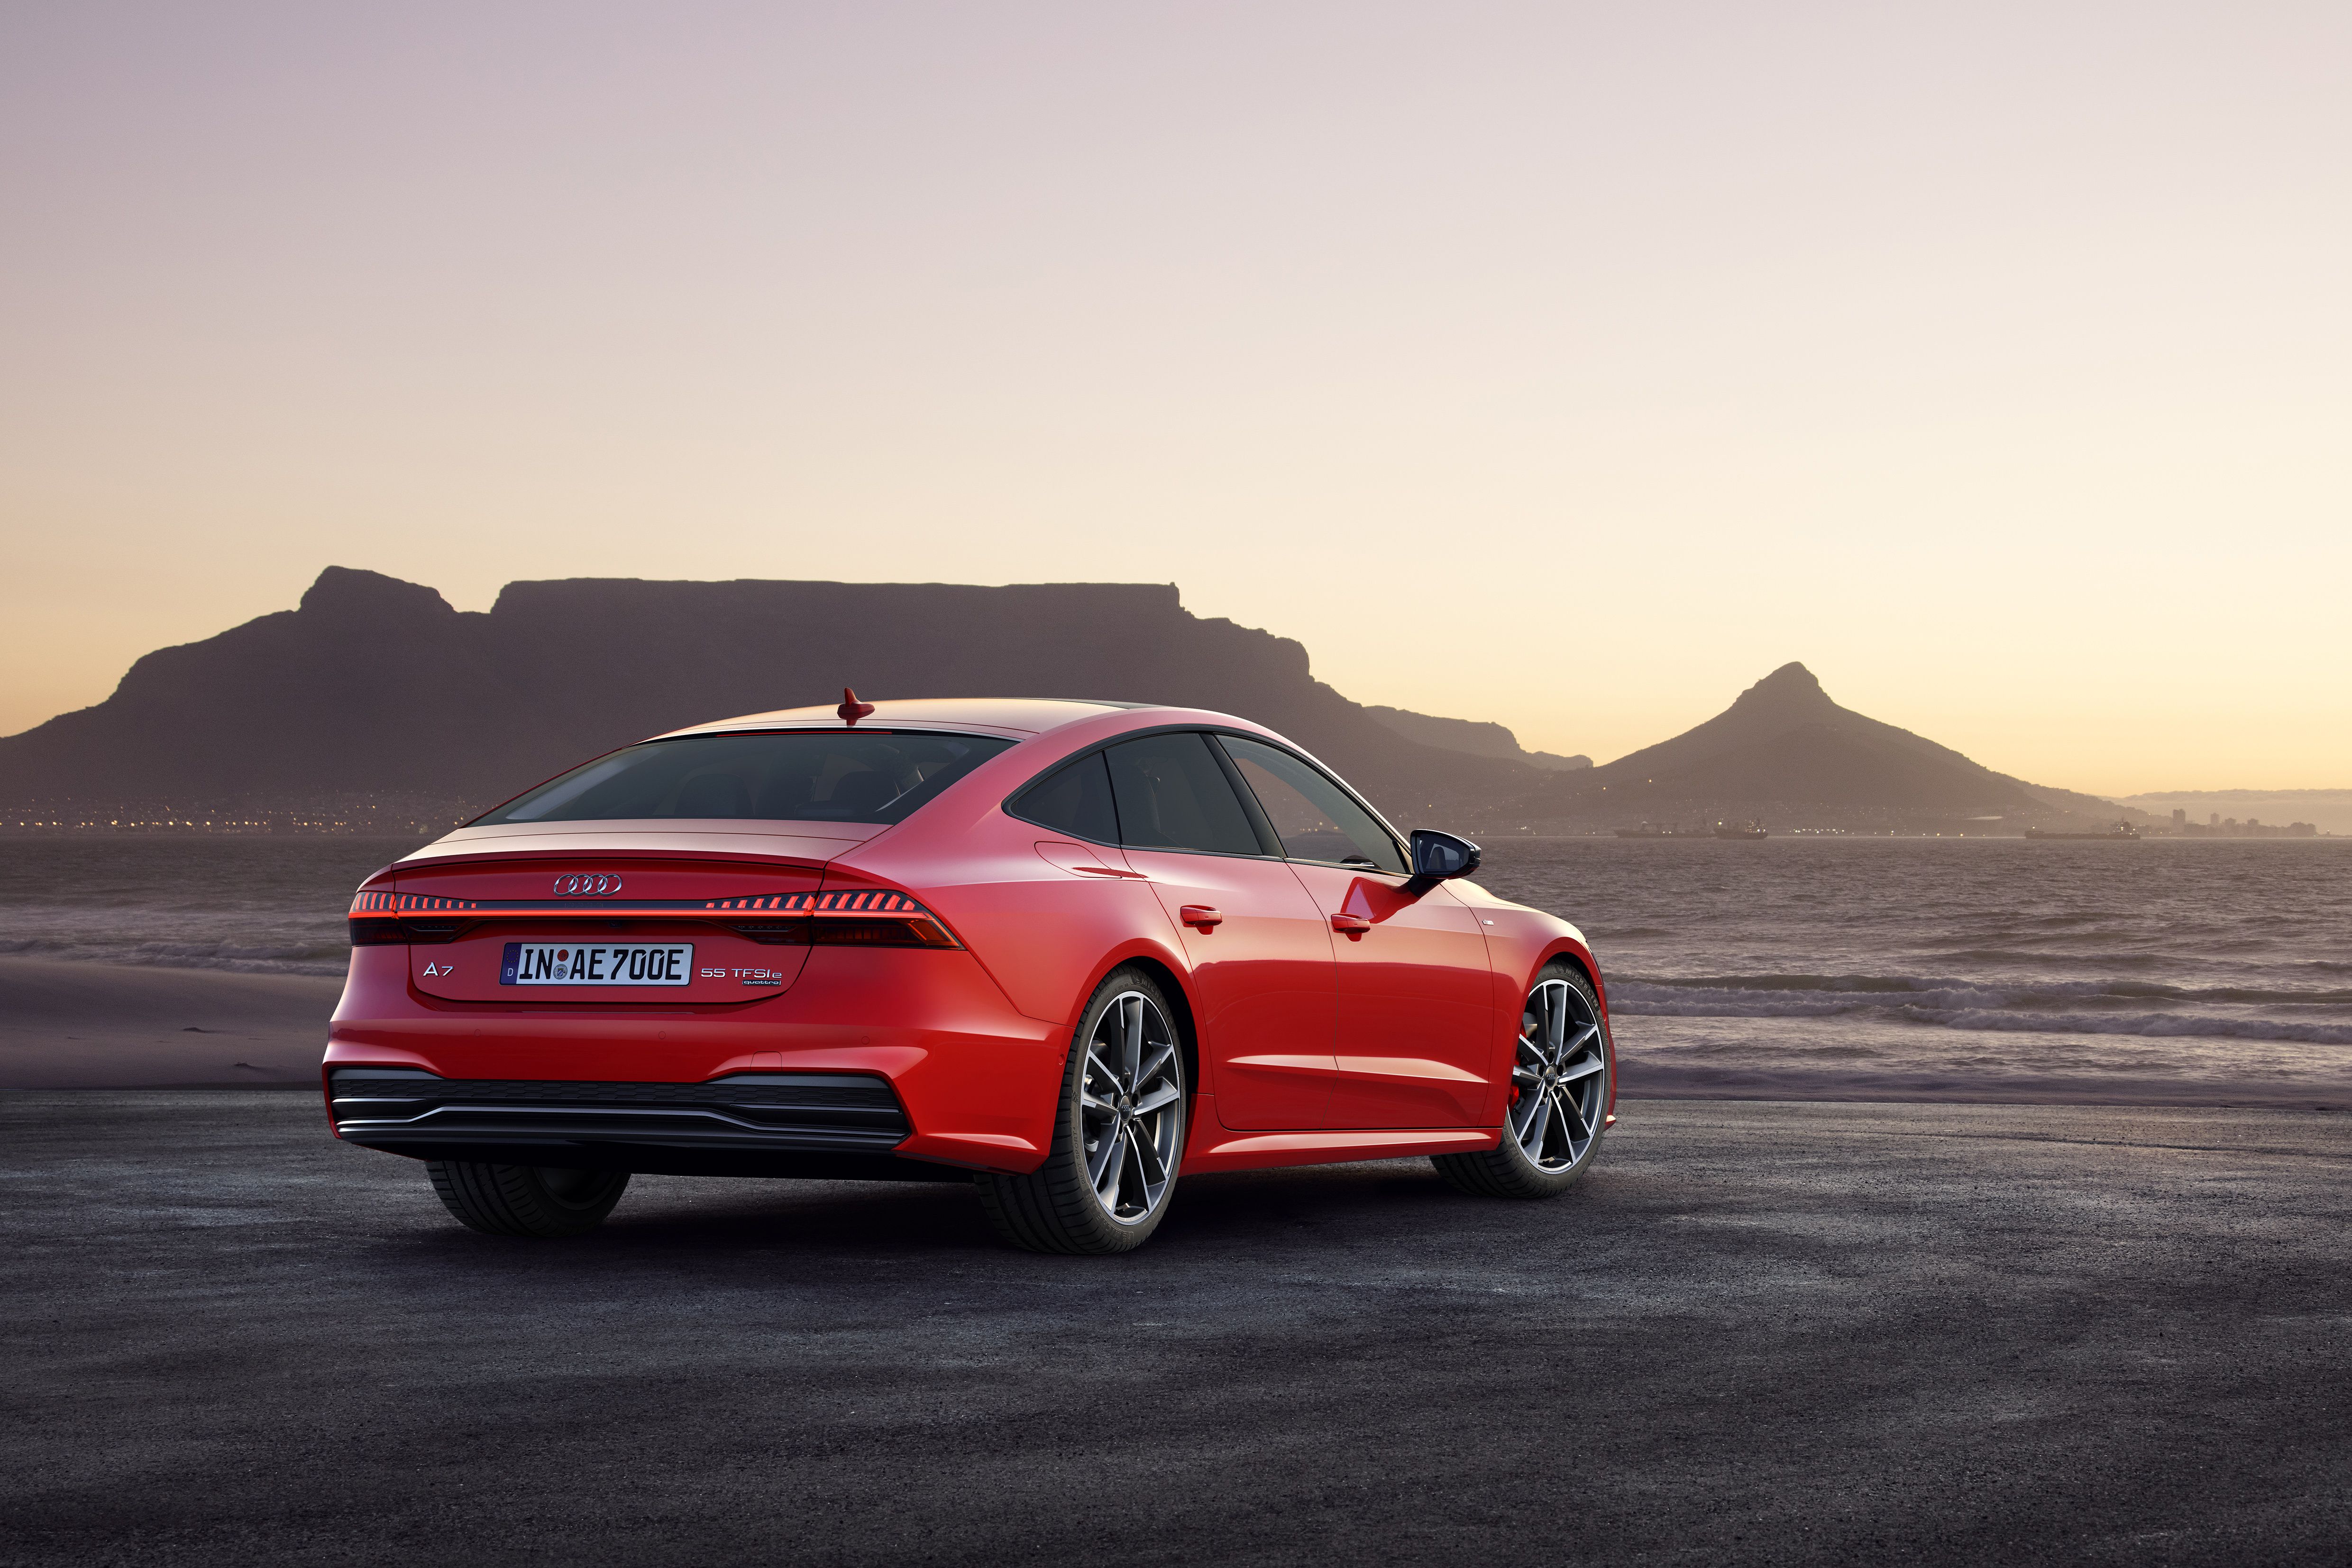 Audi A7 Sportback, HD Cars, 4k Wallpaper, Image, Background, Photo and Picture